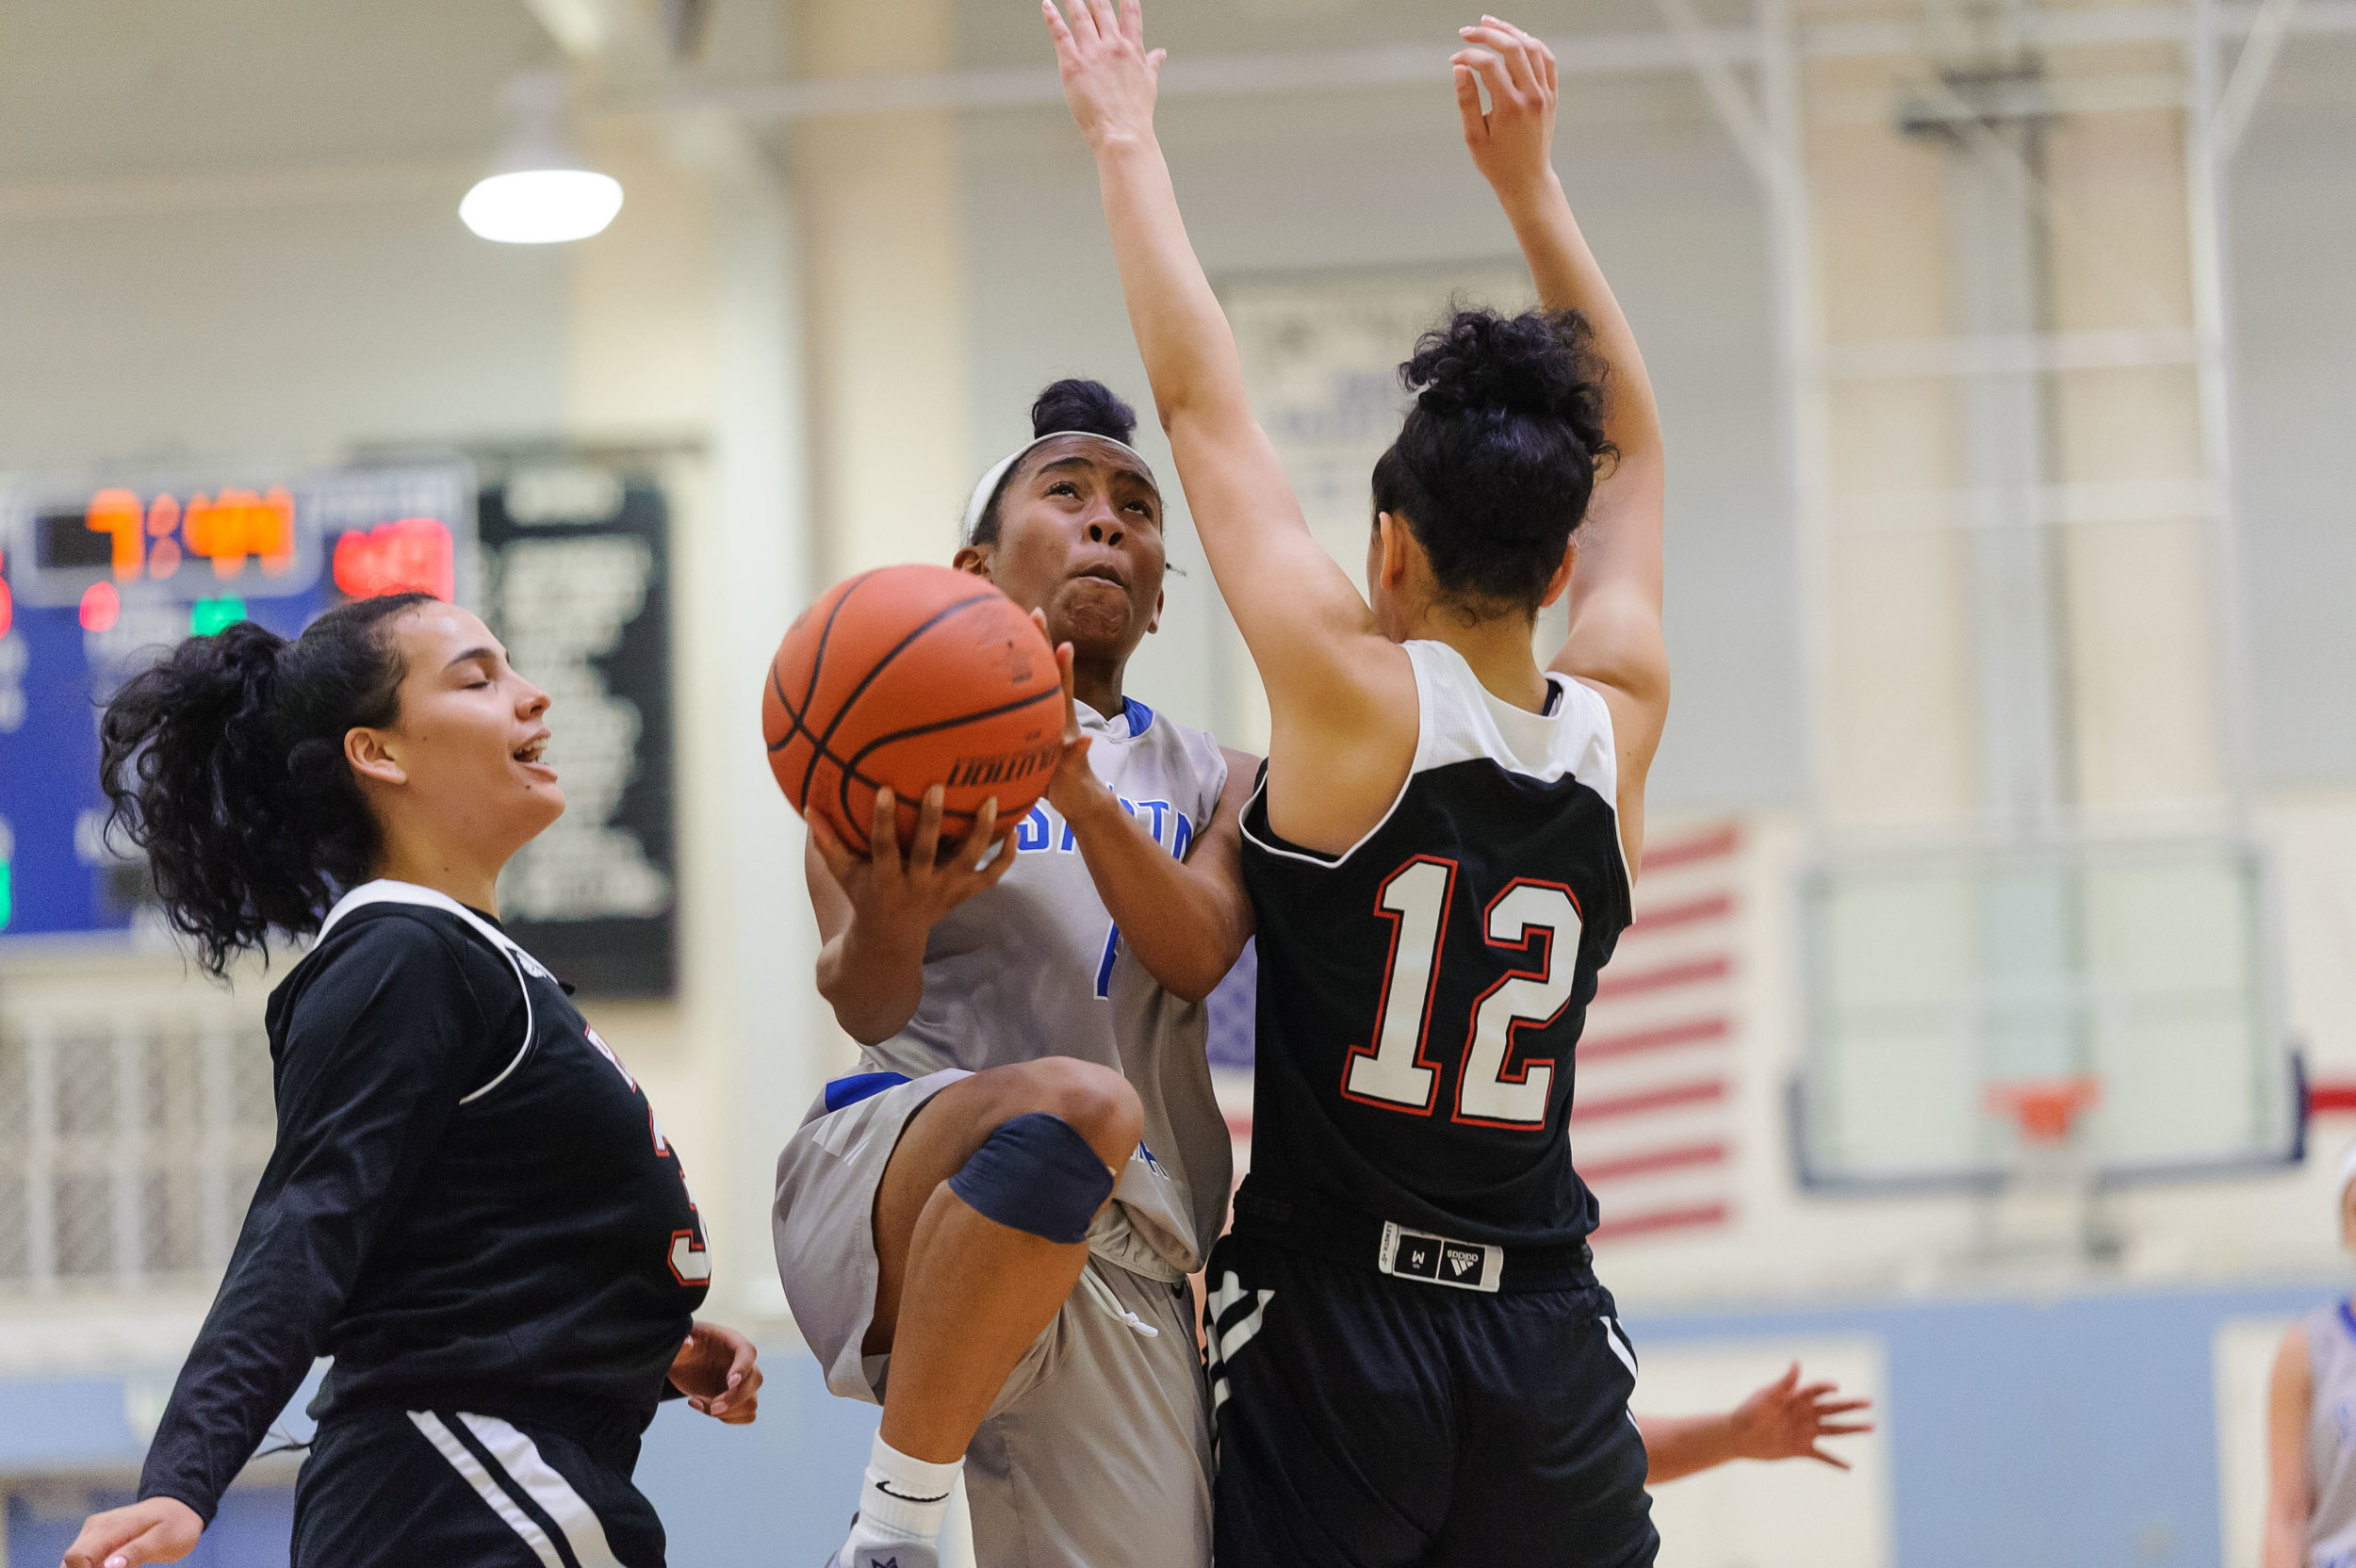  Guard Lisa Hall (4,Middle) of Santa Monica College goes up for a layup while contested by Adriana Penate (12,Right) of Pierce College. The Santa Monica College Corsairs win their final game of the season 76-53 against the Pierce College Brahmas. The